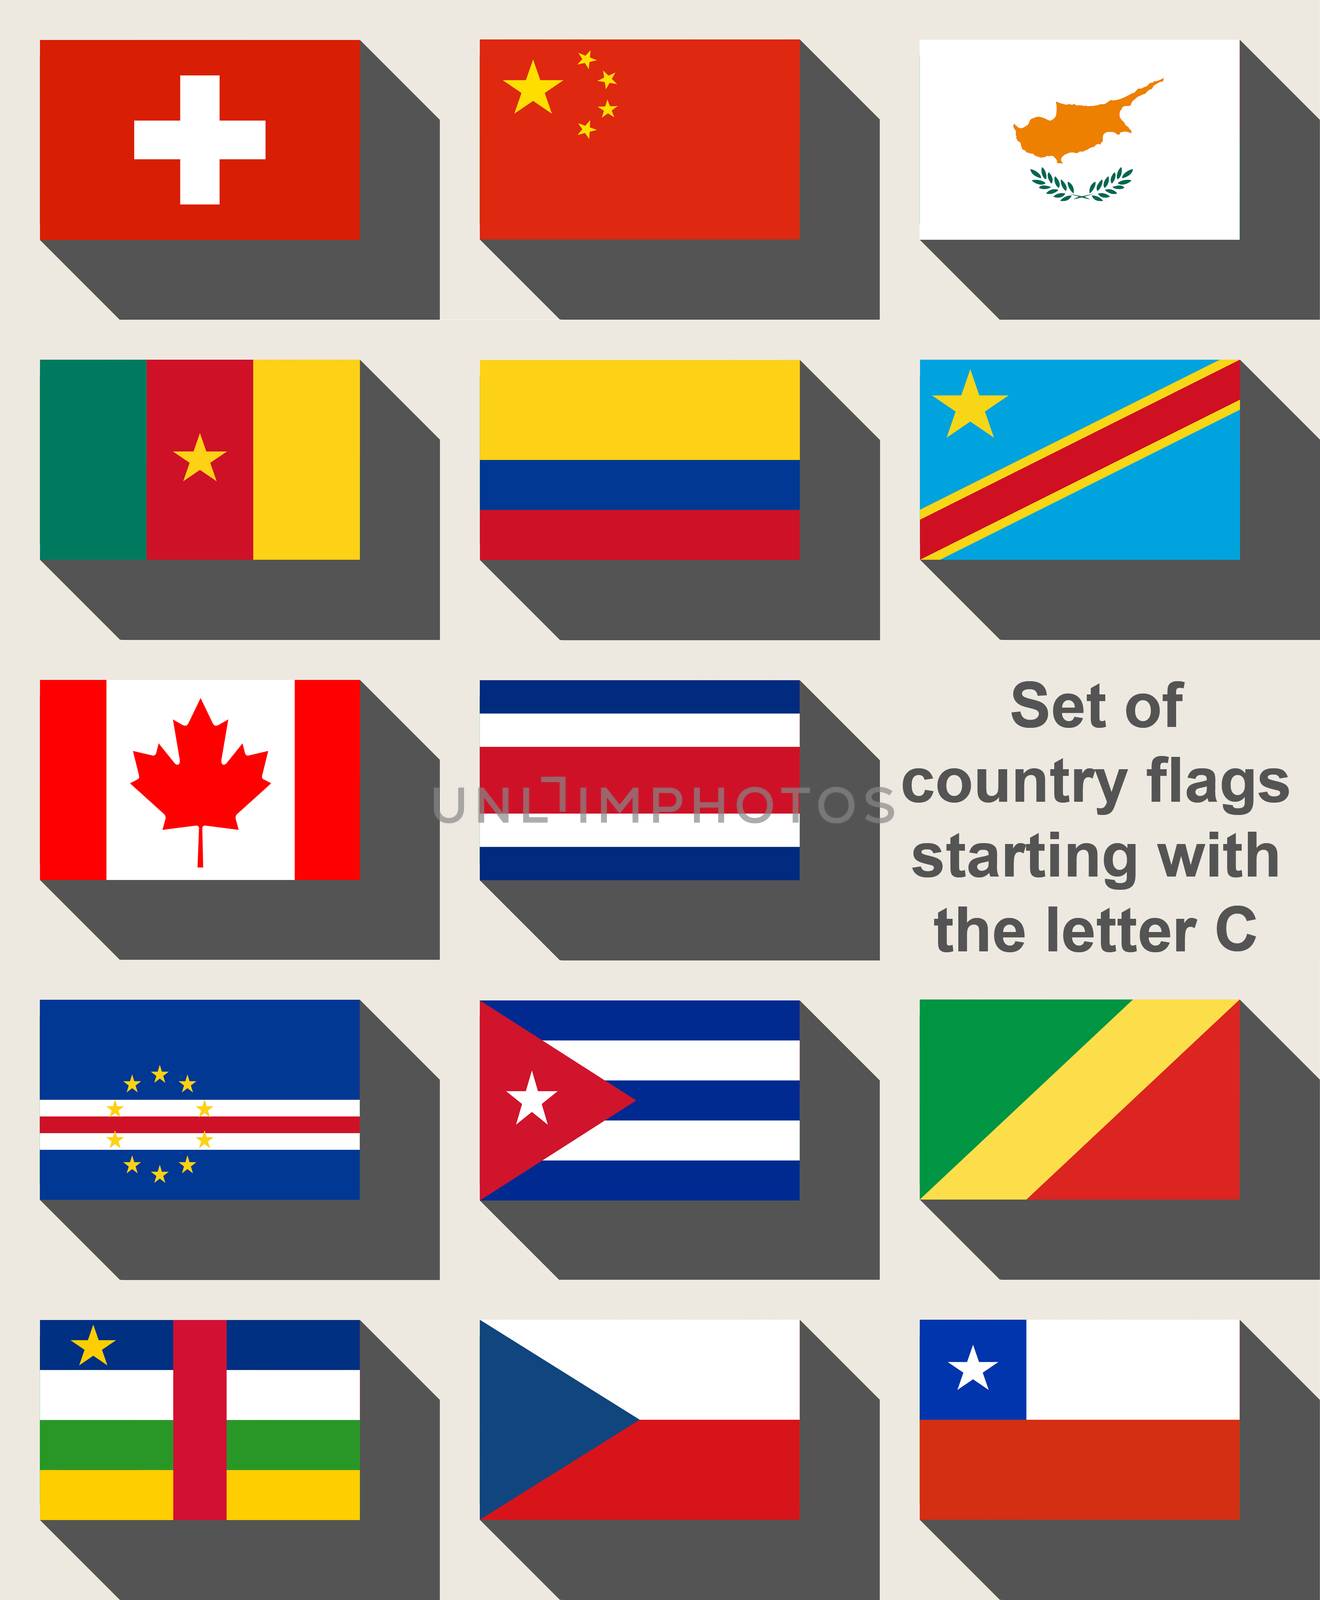 Set of country flags starting with the letter C by speedfighter